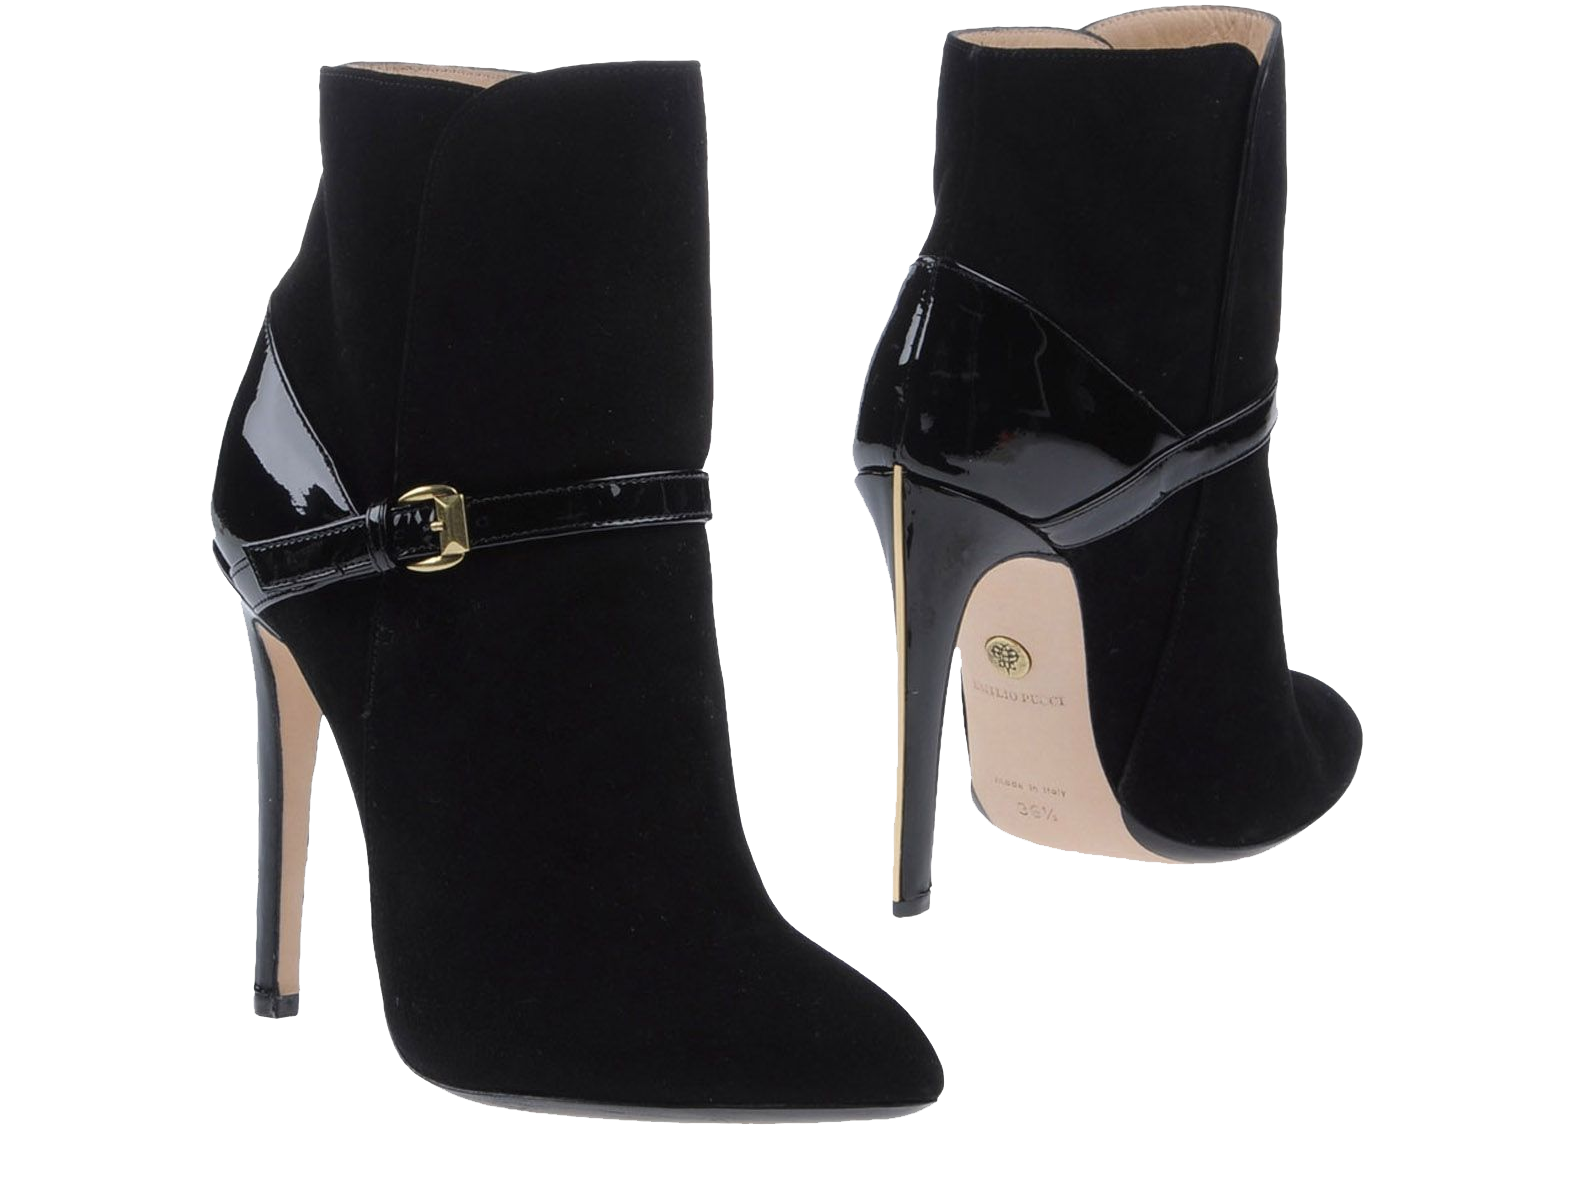 Emilio Pucci black suede patent leather ankle boots